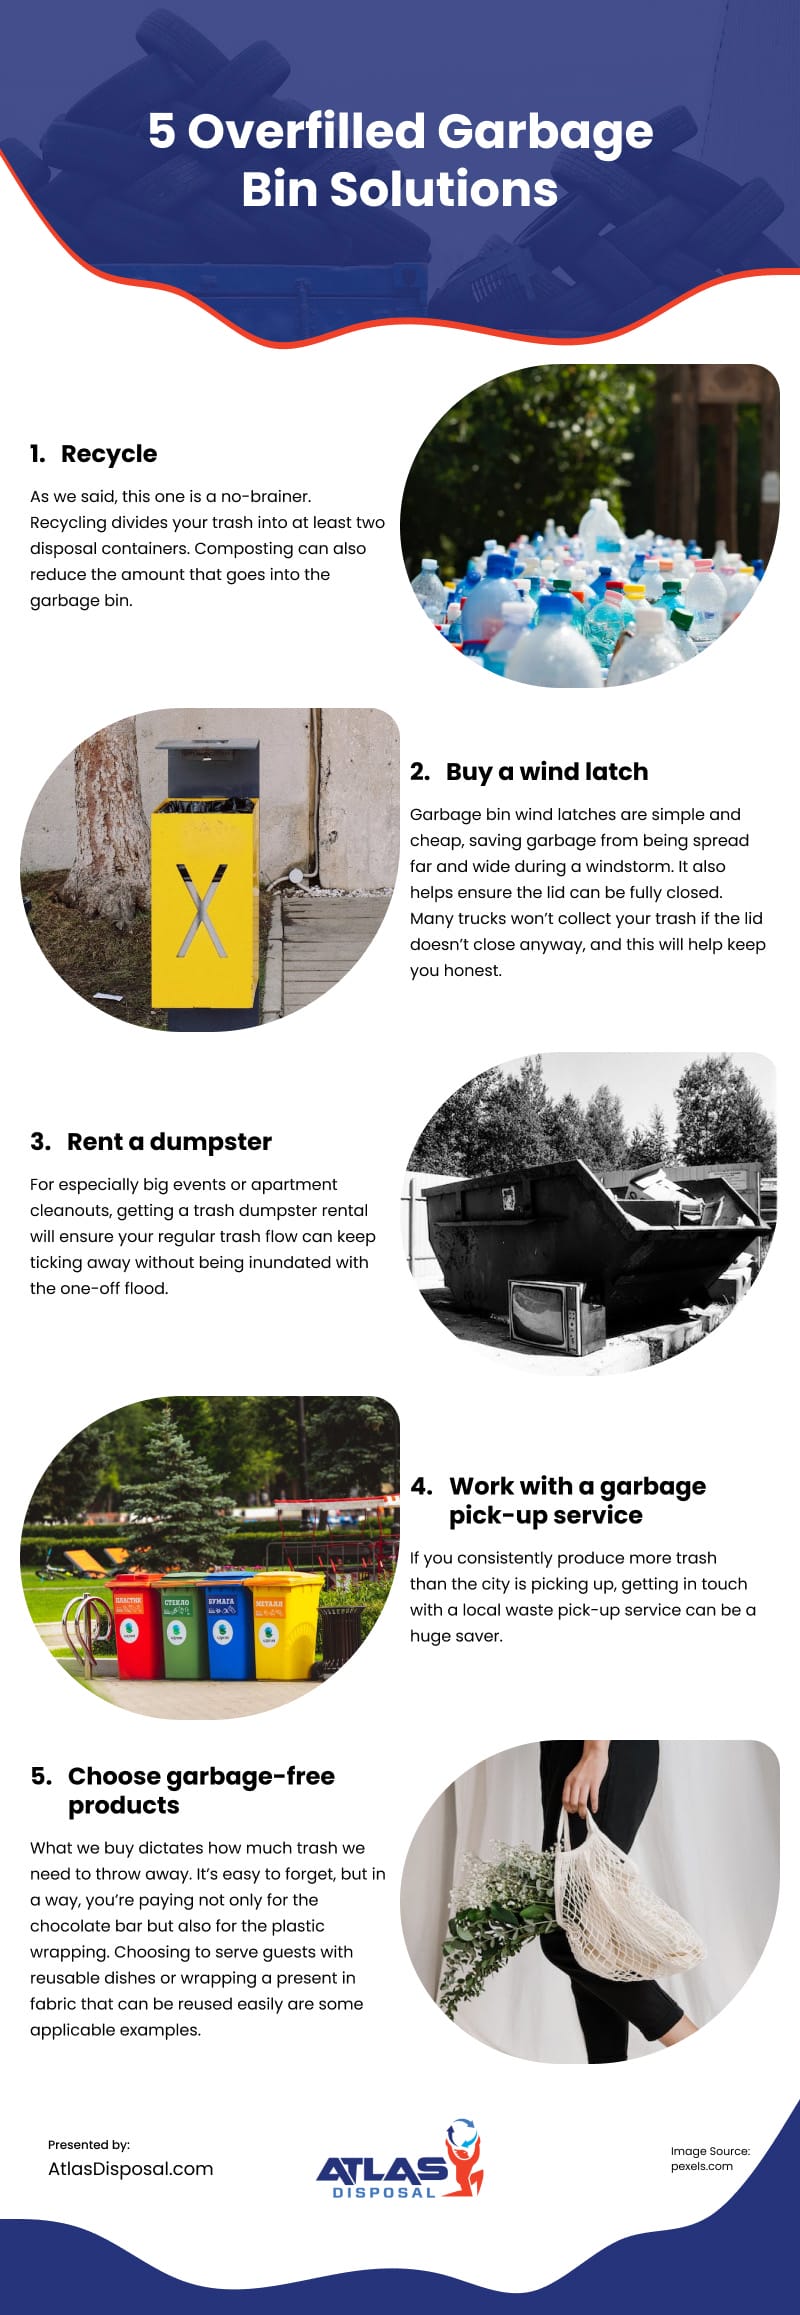 5 Overfilled Garbage Bin Solutions Infographic